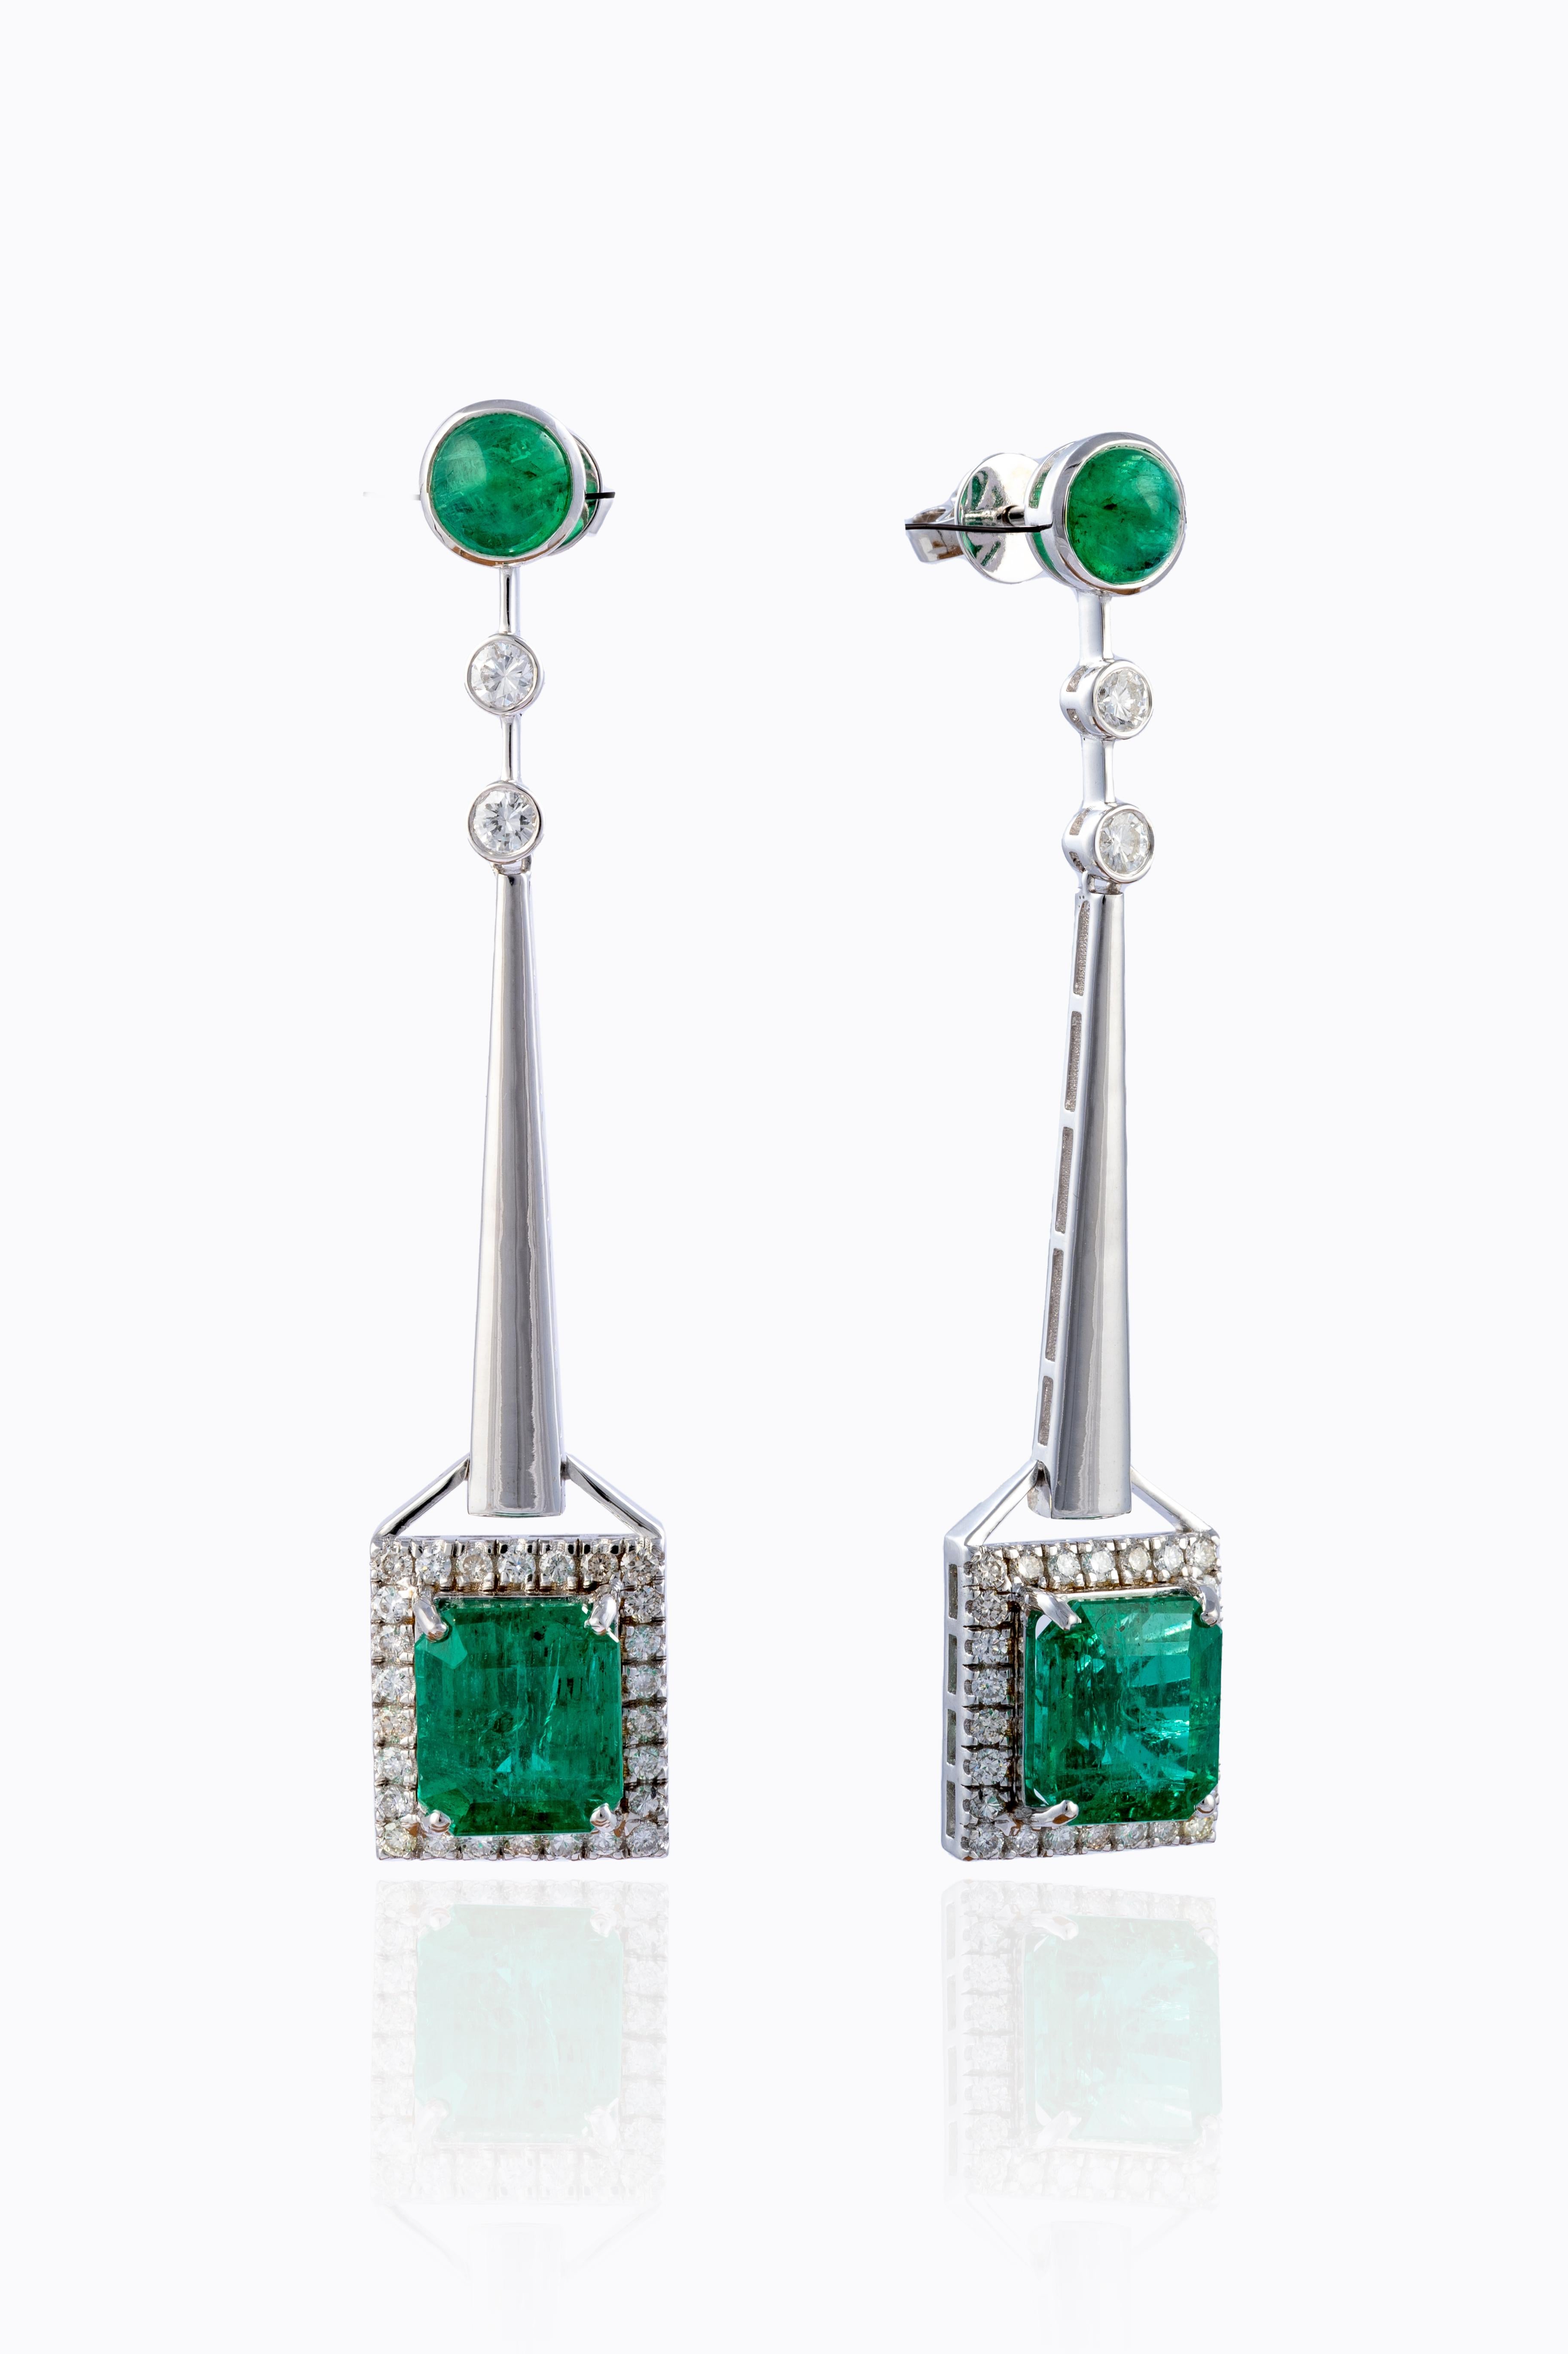 this is an elegant natural Zambian Emerald earrings with vsi clarity diamonds and G colour. the emeralds are of very high quality.

emeralds : 10.52 cts
diamonds: 1.32 cts.
gold : 9.58 gms
Its very hard to capture the true color and luster of the